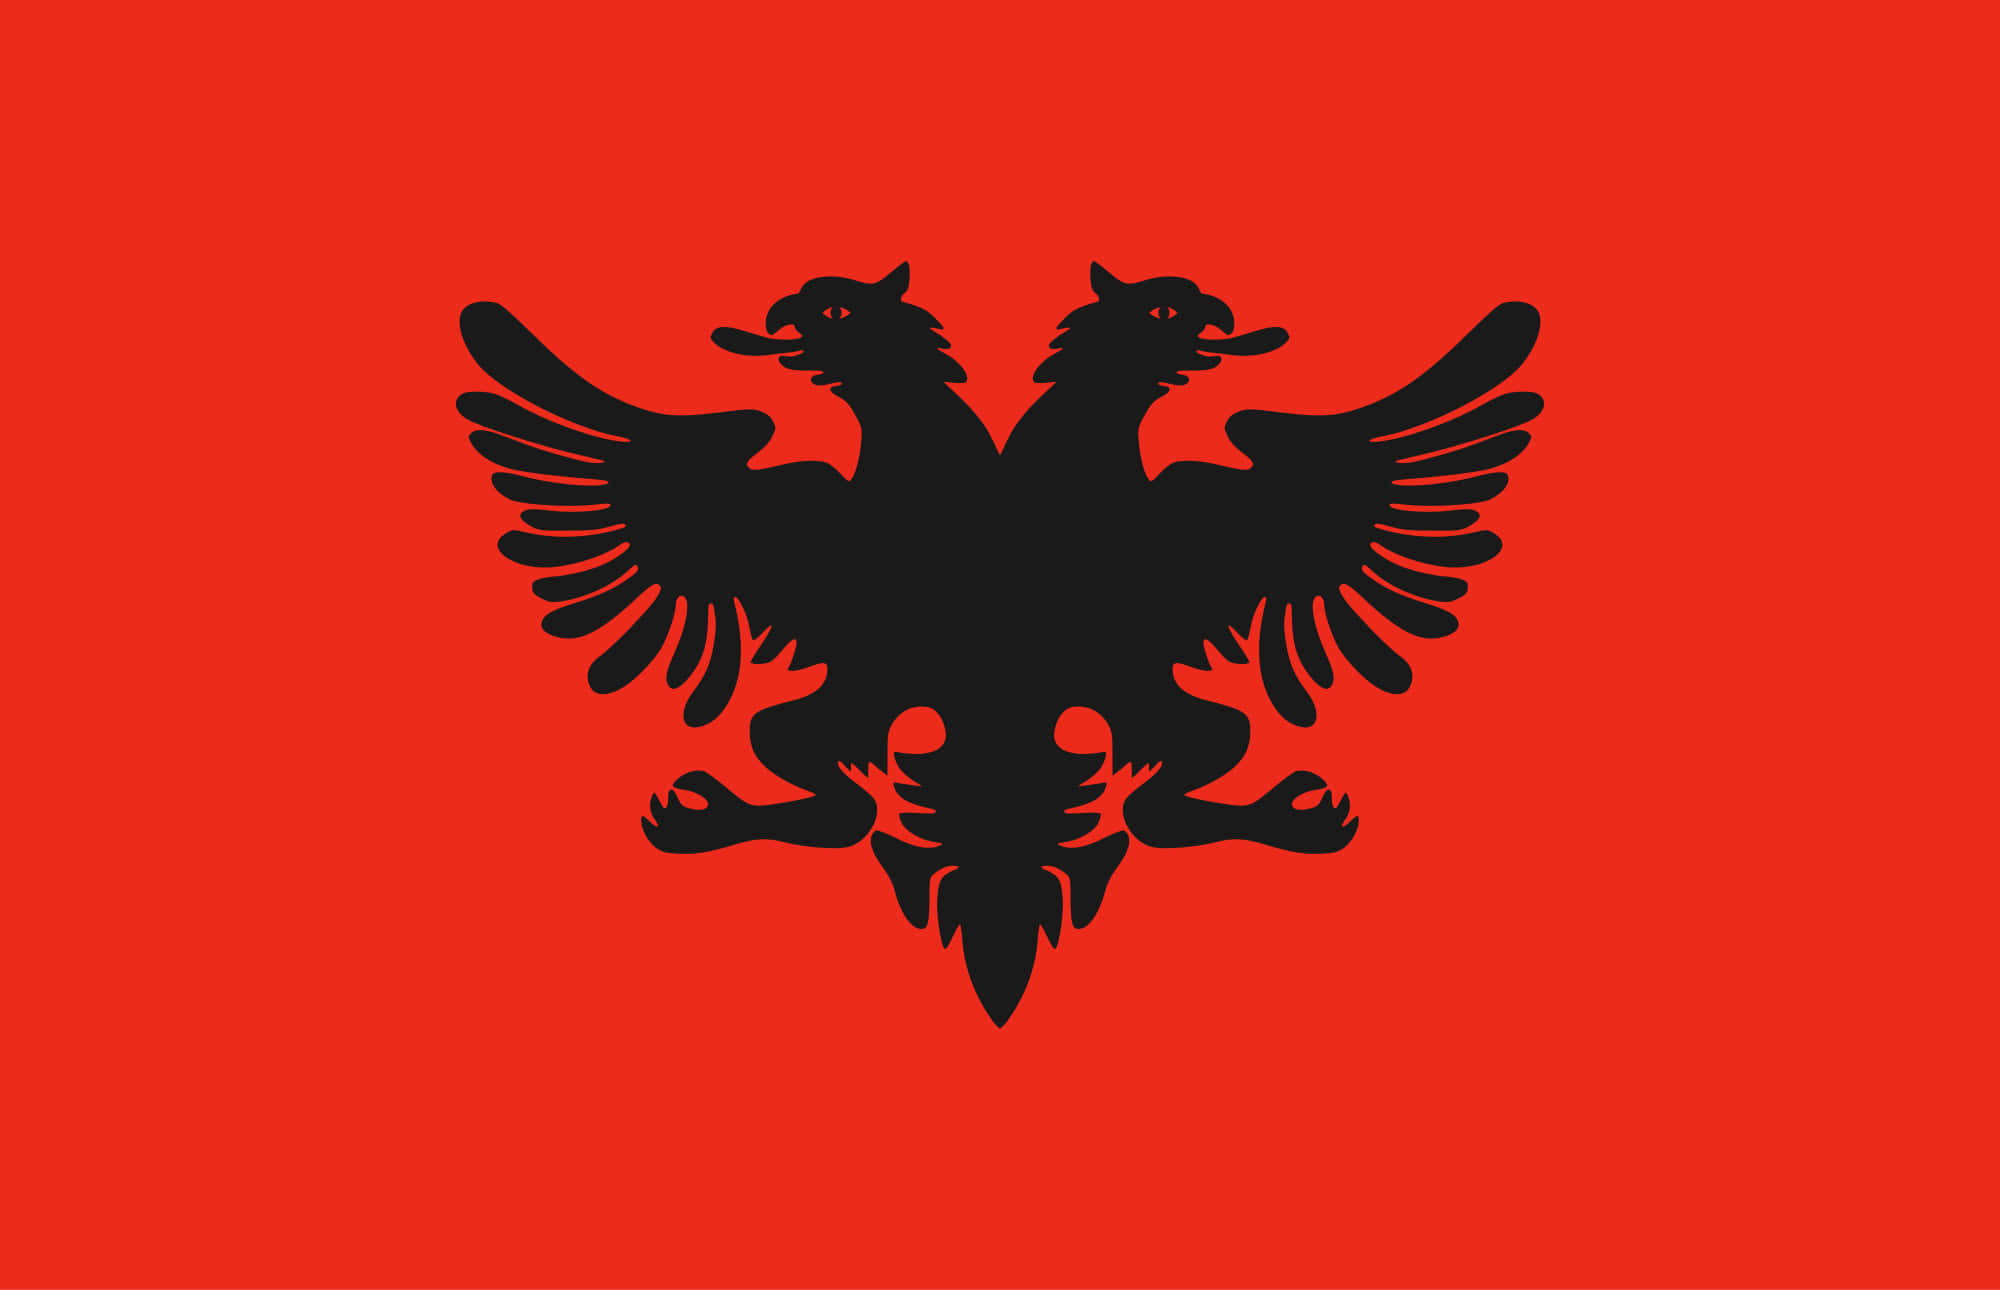 The Albanian Flag With Two Eagles On A Red Background